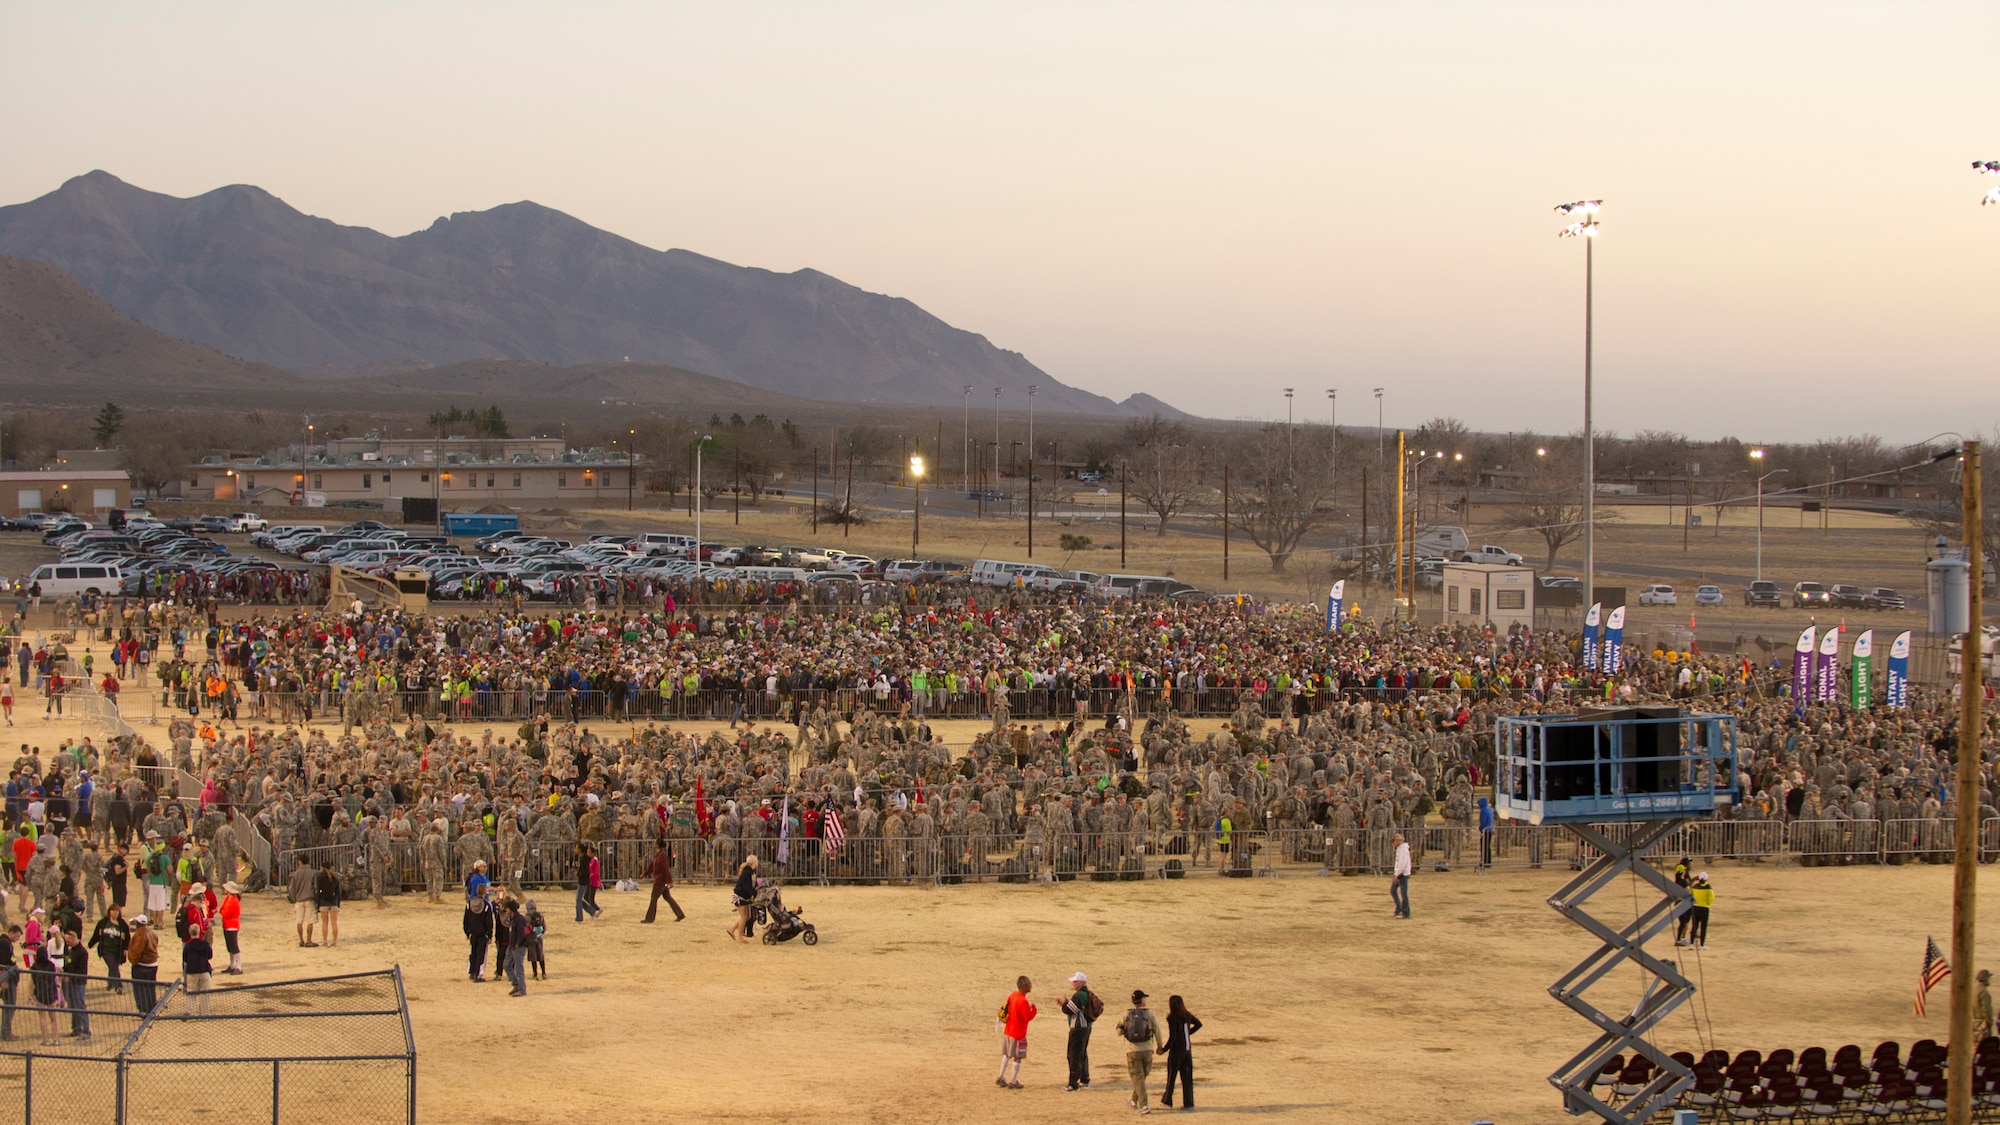 Participants in the 24th annual Bataan Memorial Death March gather during the opening ceremony at White Sands Missile Range, N.M., March 17. More than 5,800 people from across the world participated in the 26.2-mile memorial march to honor the 76,000 prisoners of war who were forced to endure marching nearly 80 miles under brutal conditions during World War II. (U.S. Air Force Photo by Airman 1st Class Michael Shoemaker/Released)